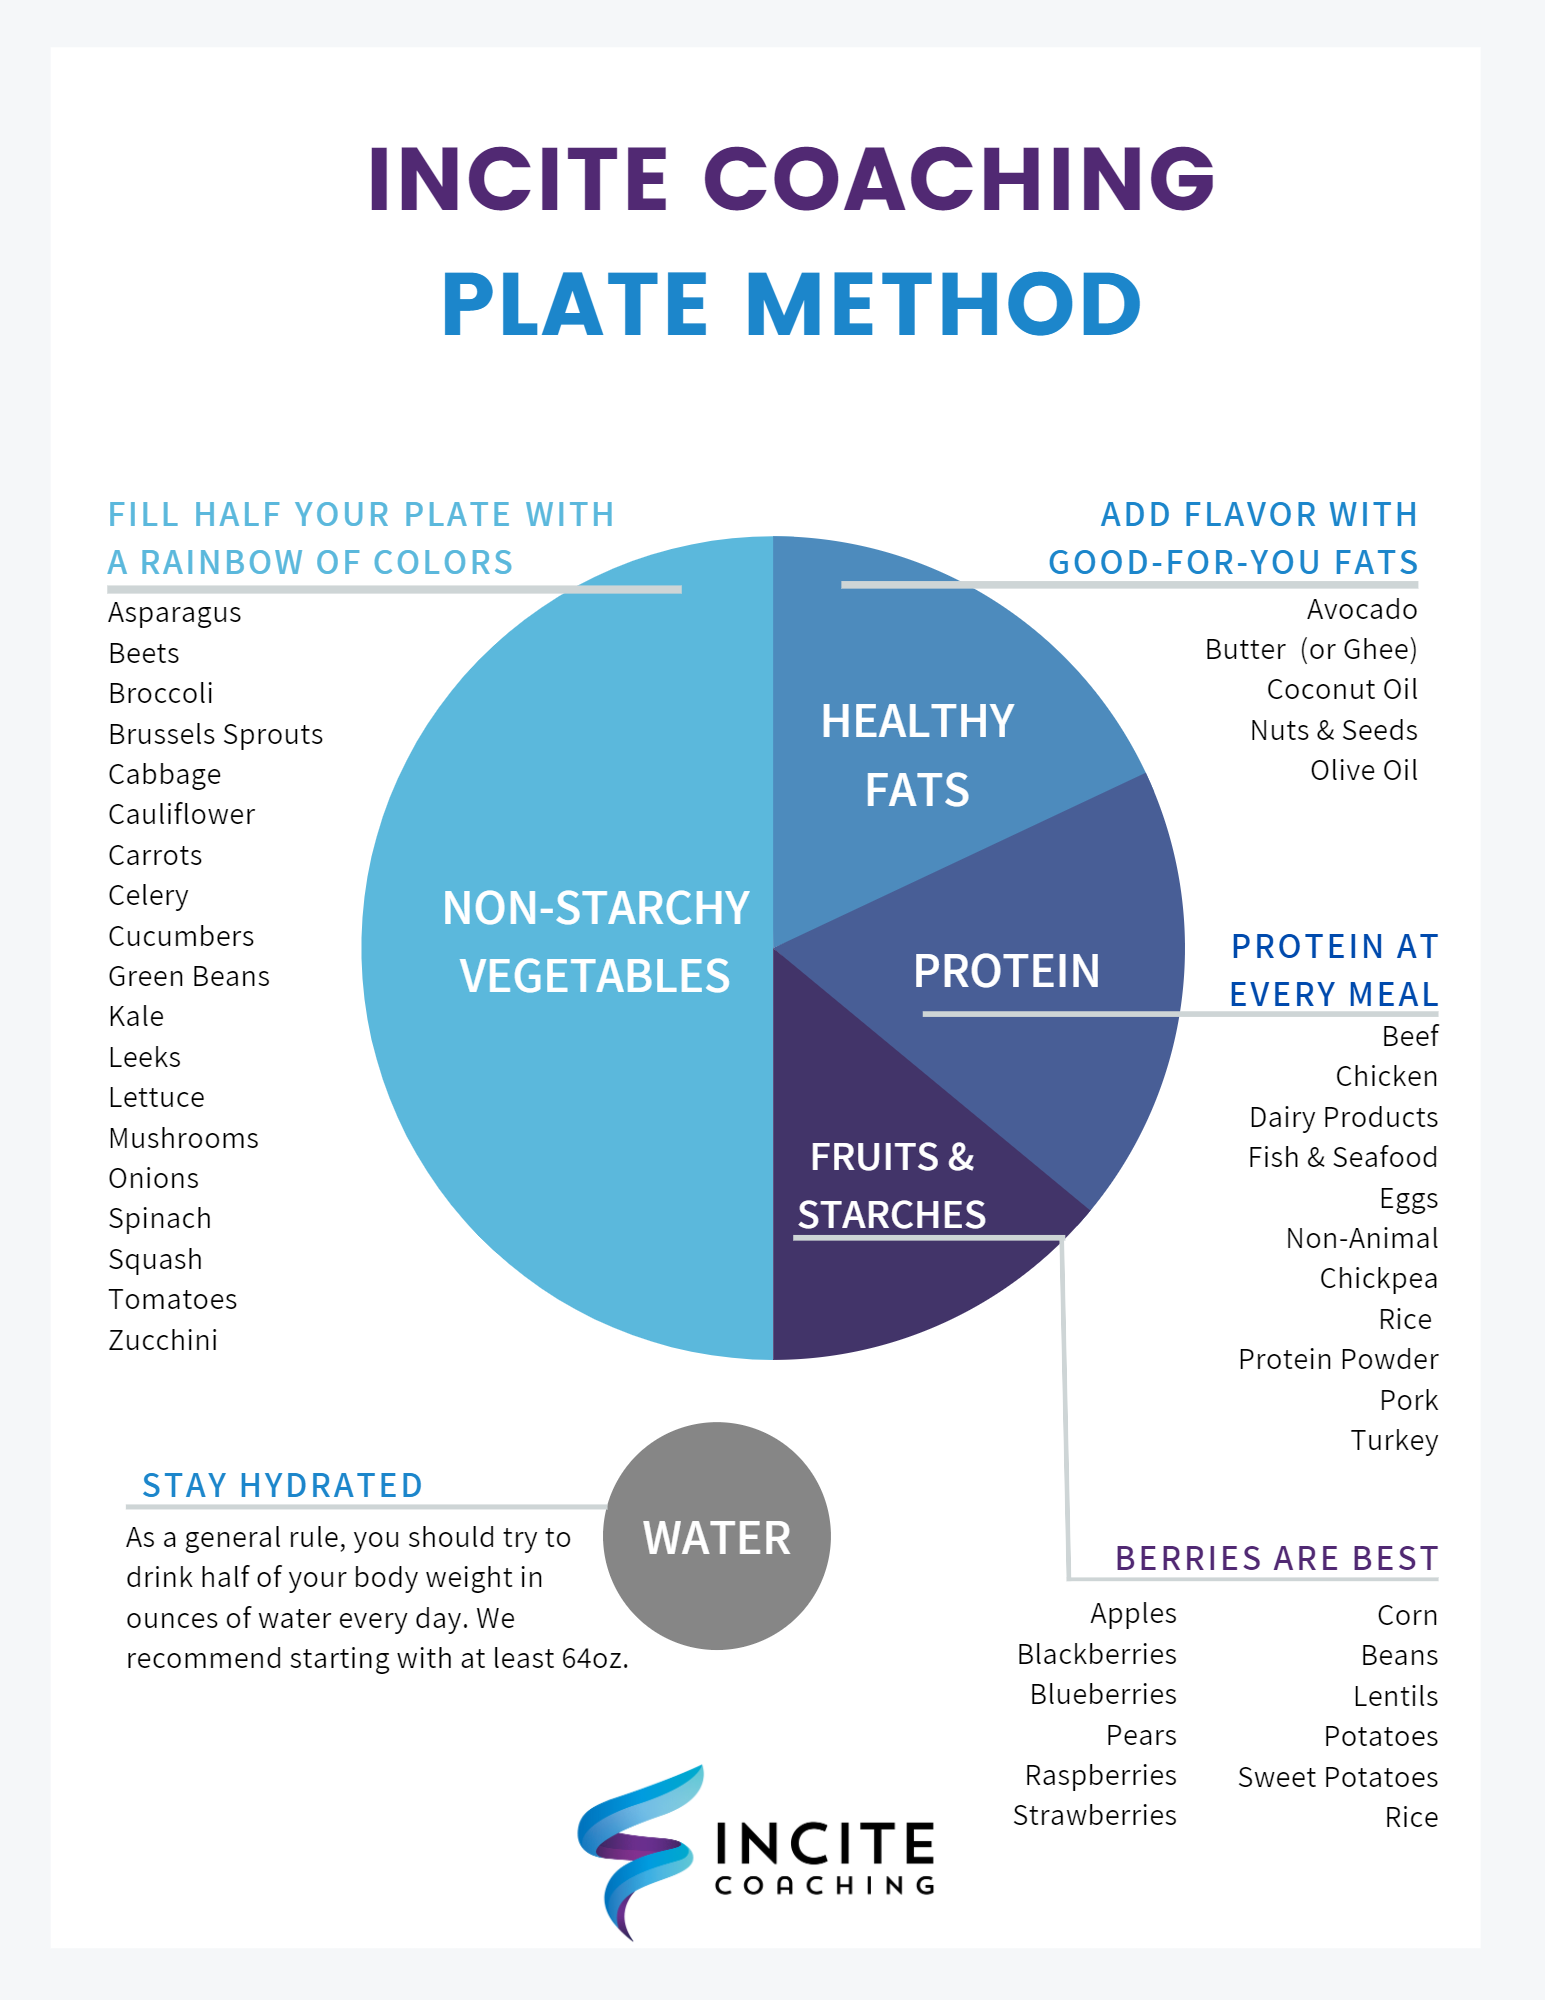 The Plate Method